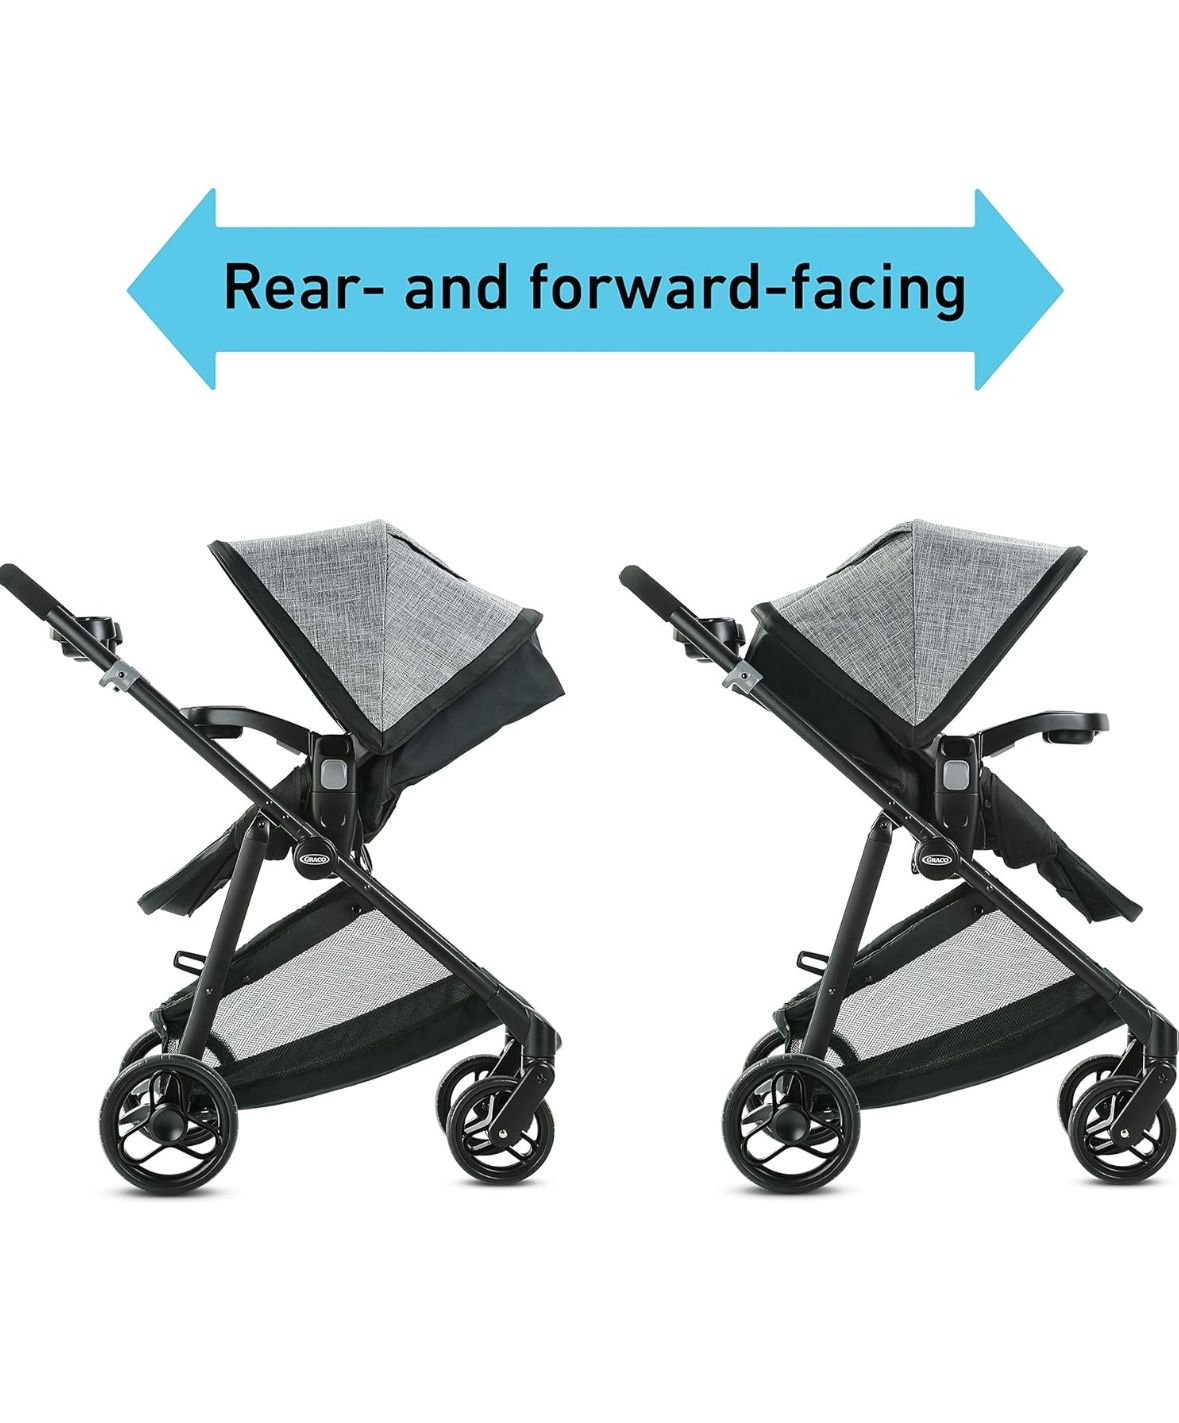 Graco Modes Element Travel System 3-in-1 stroller